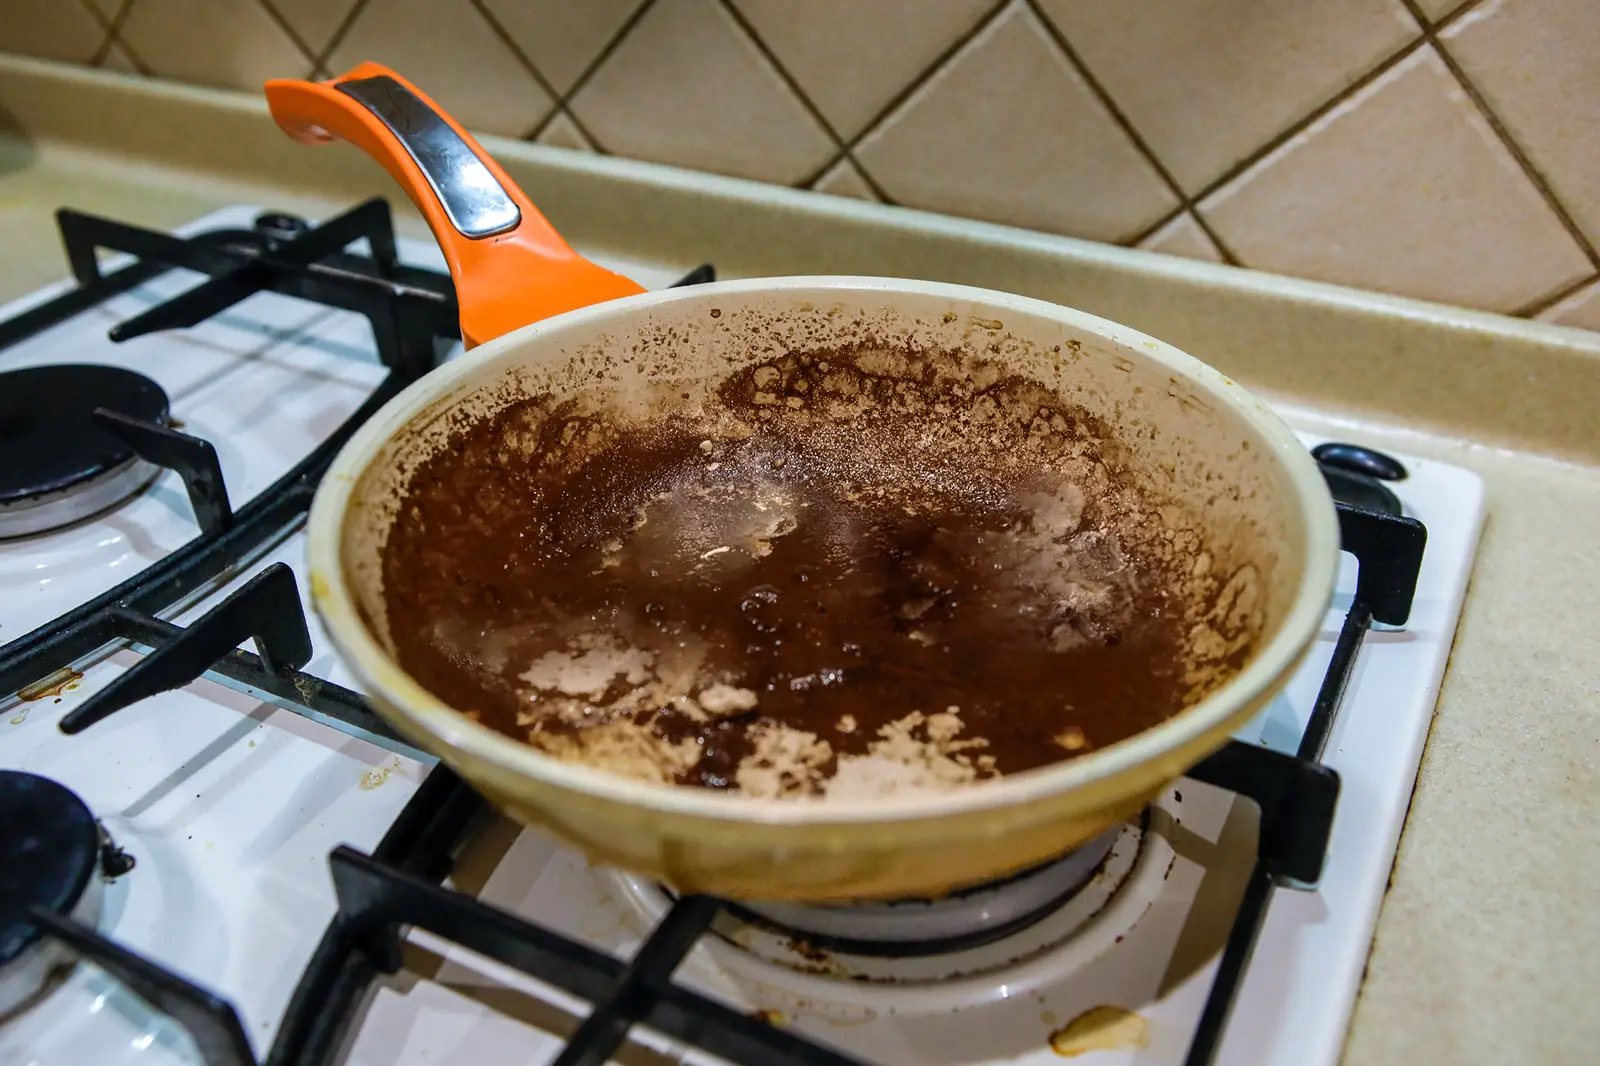 On the stove is a dirty, burnt, unwashed pan, close-up